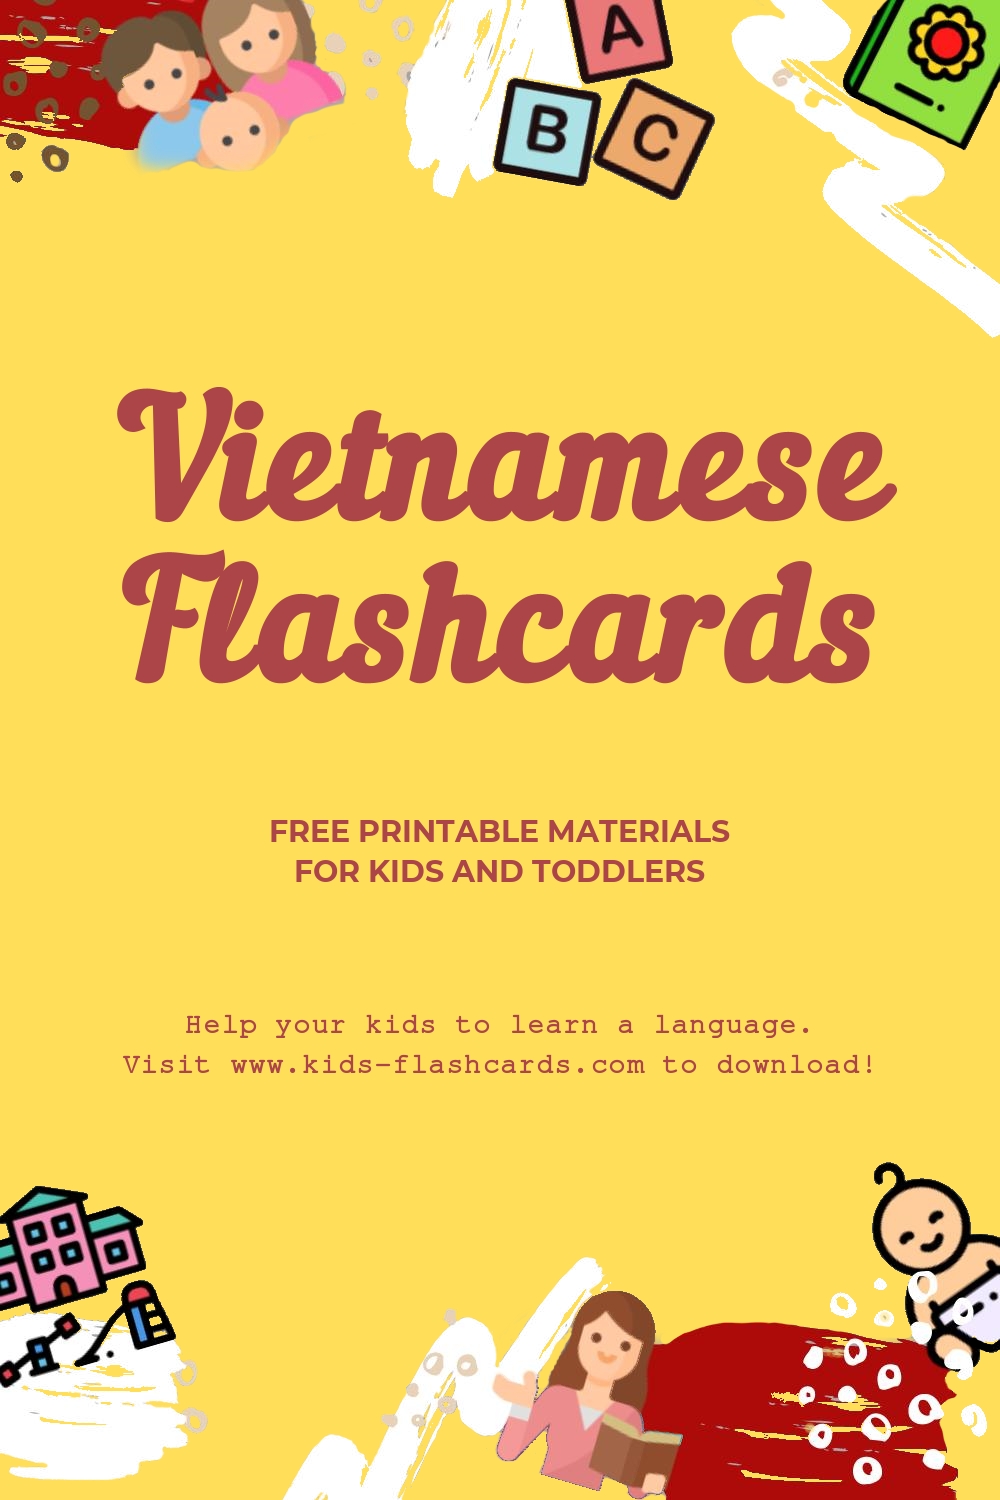 Worksheets to learn Vietnamese language